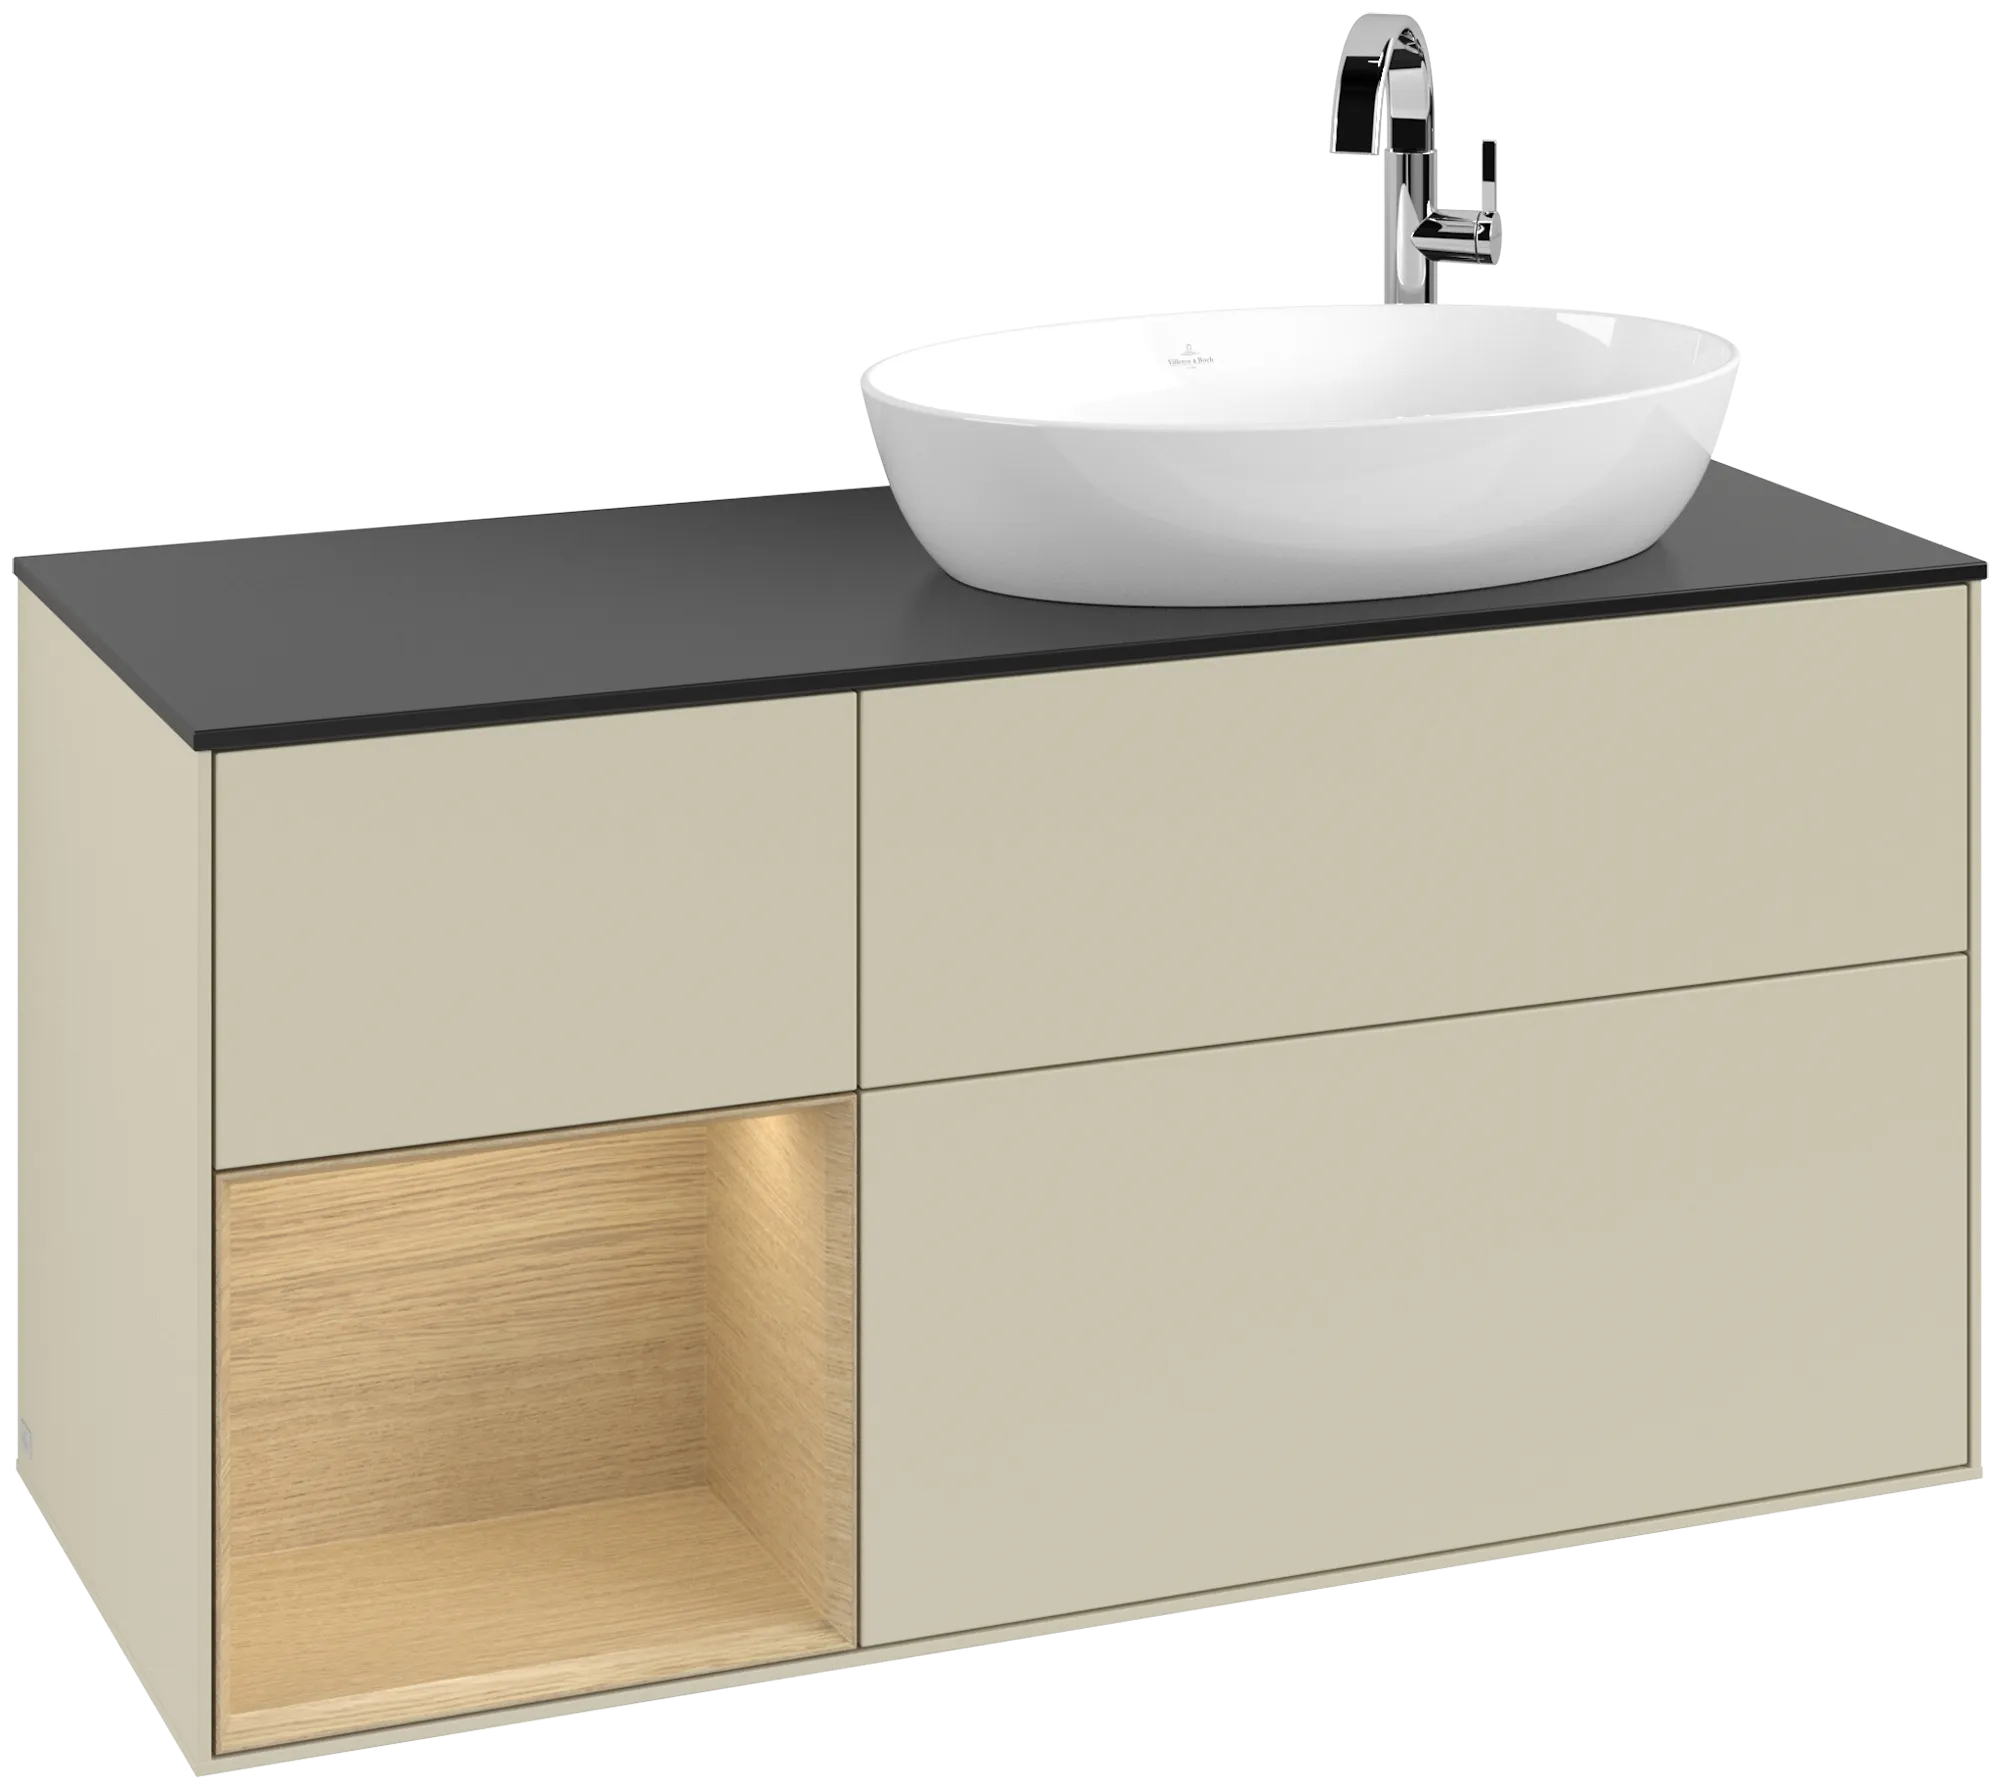 Picture of VILLEROY BOCH Finion Vanity unit, with lighting, 3 pull-out compartments, 1200 x 603 x 501 mm, Silk Grey Matt Lacquer / Oak Veneer / Glass Black Matt #G922PCHJ